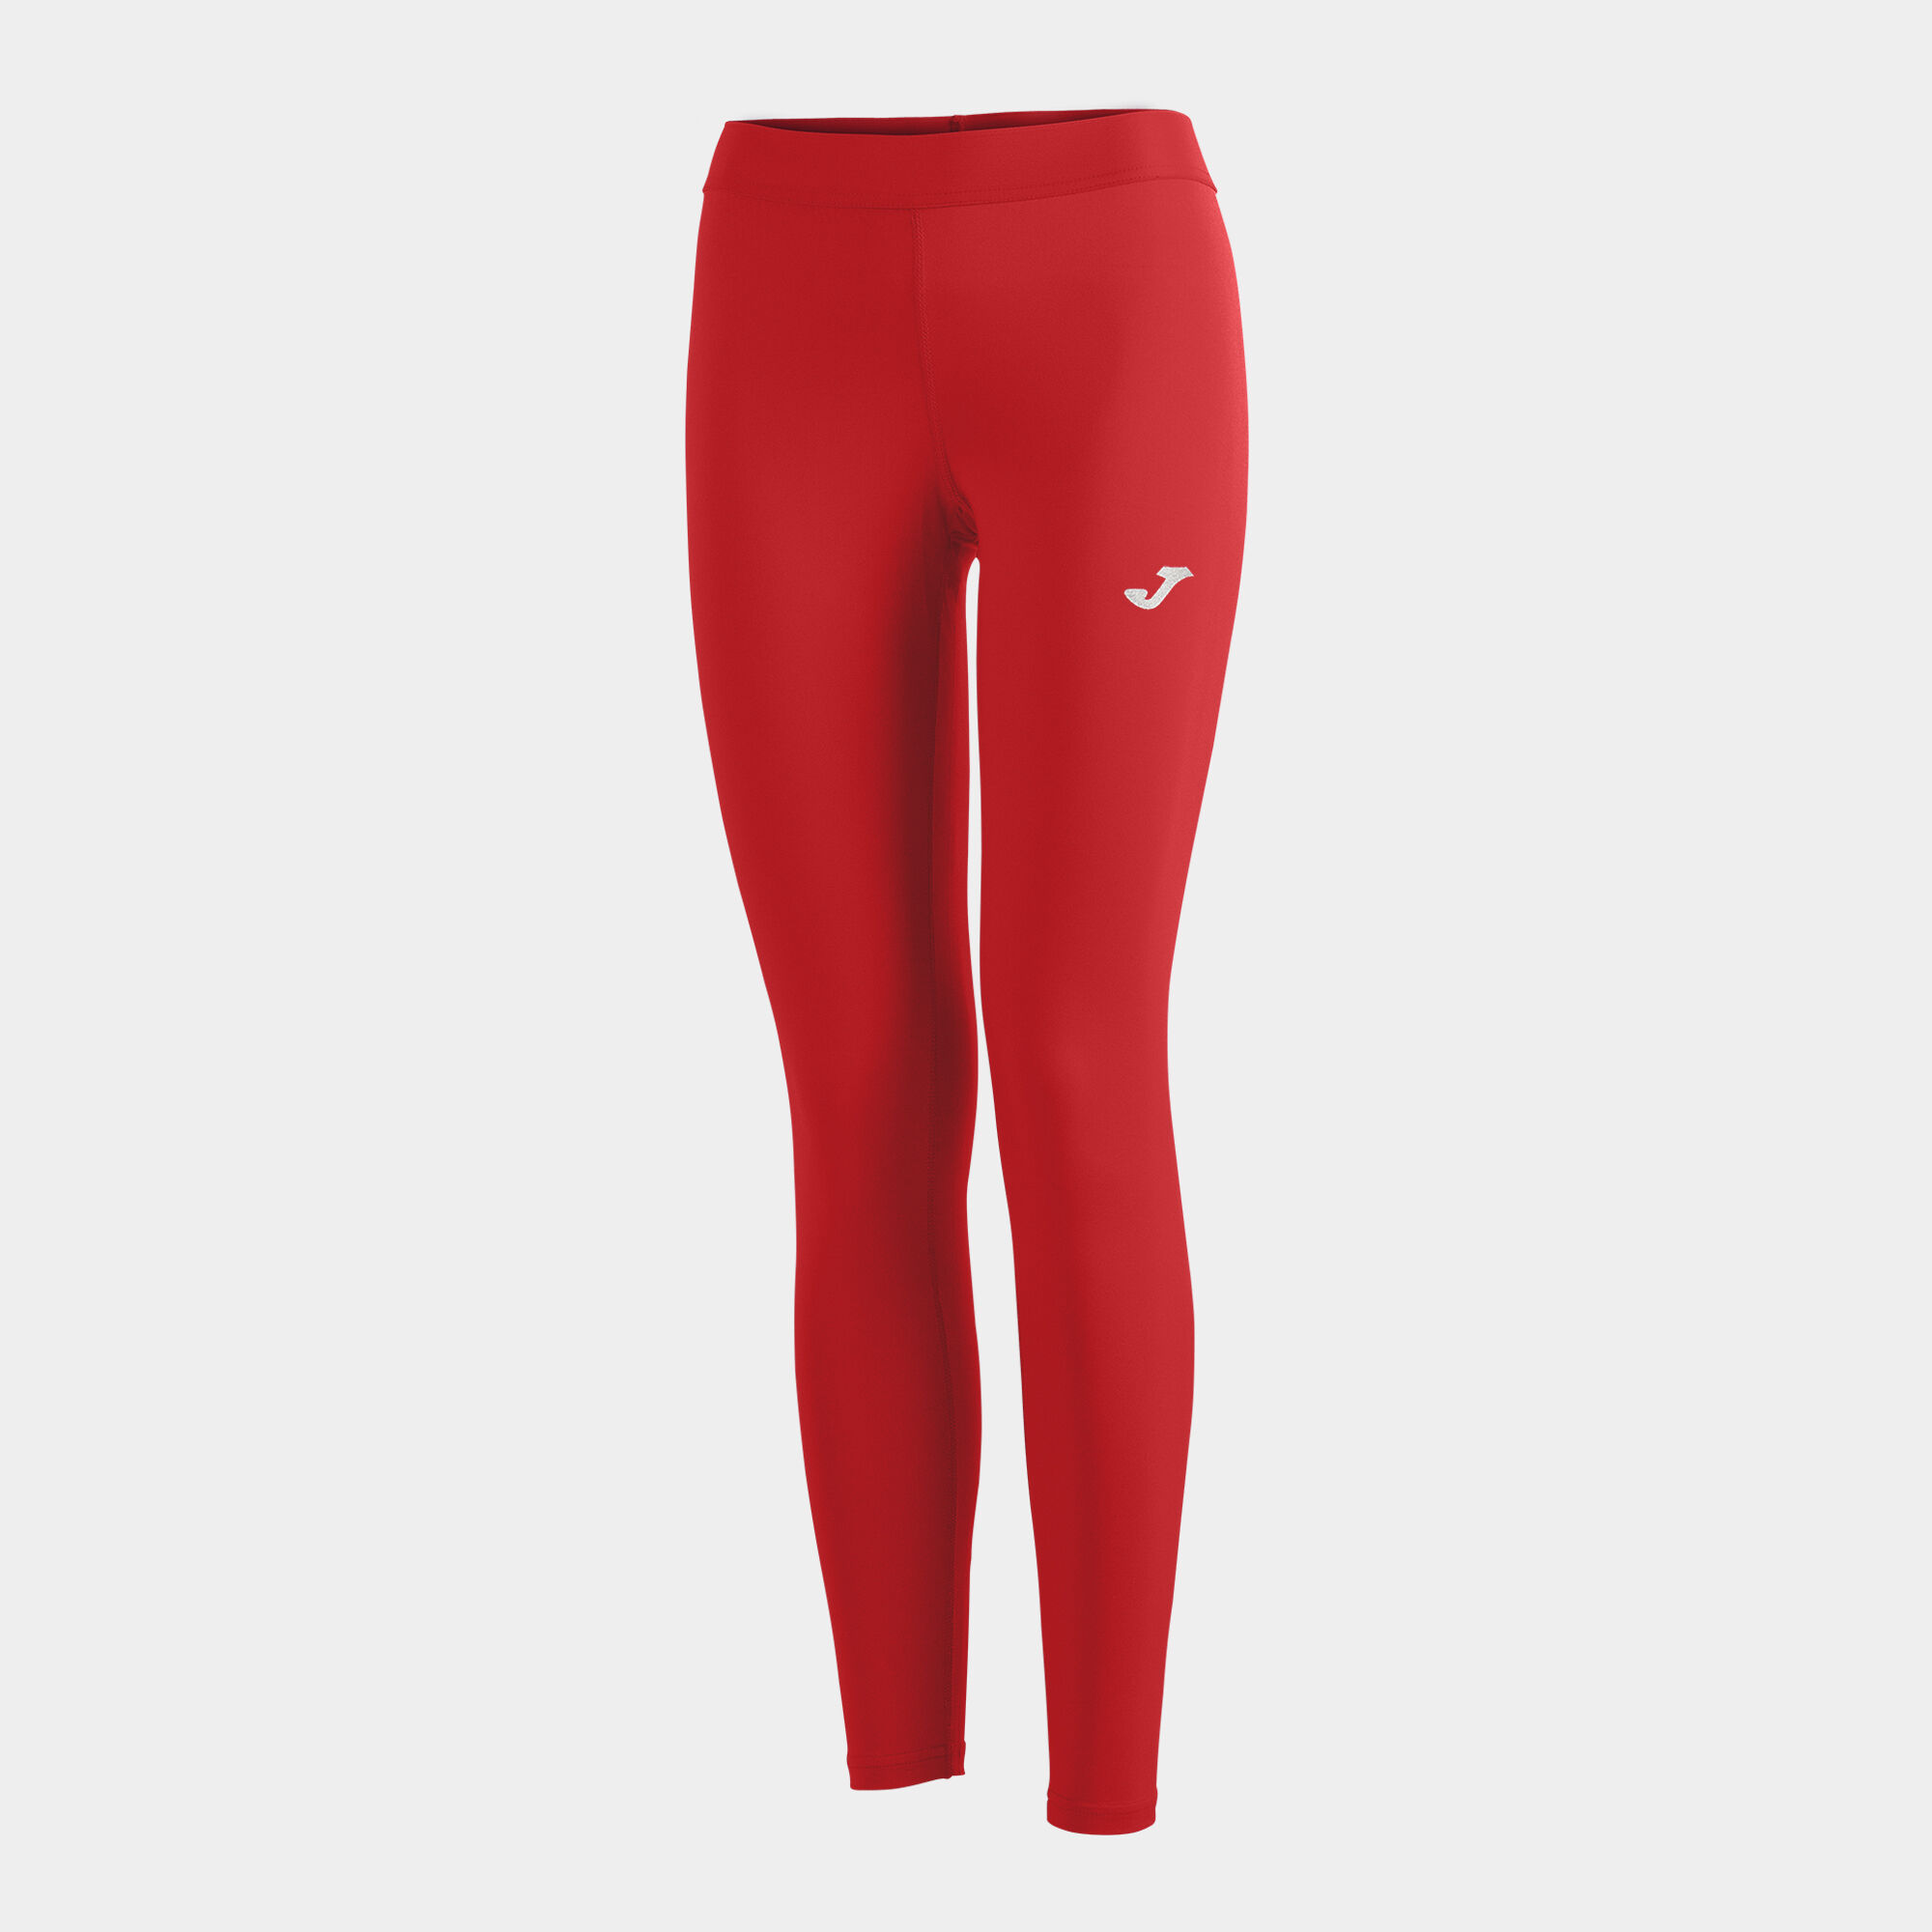 LONG TIGHTS WOMAN OLIMPIA RED